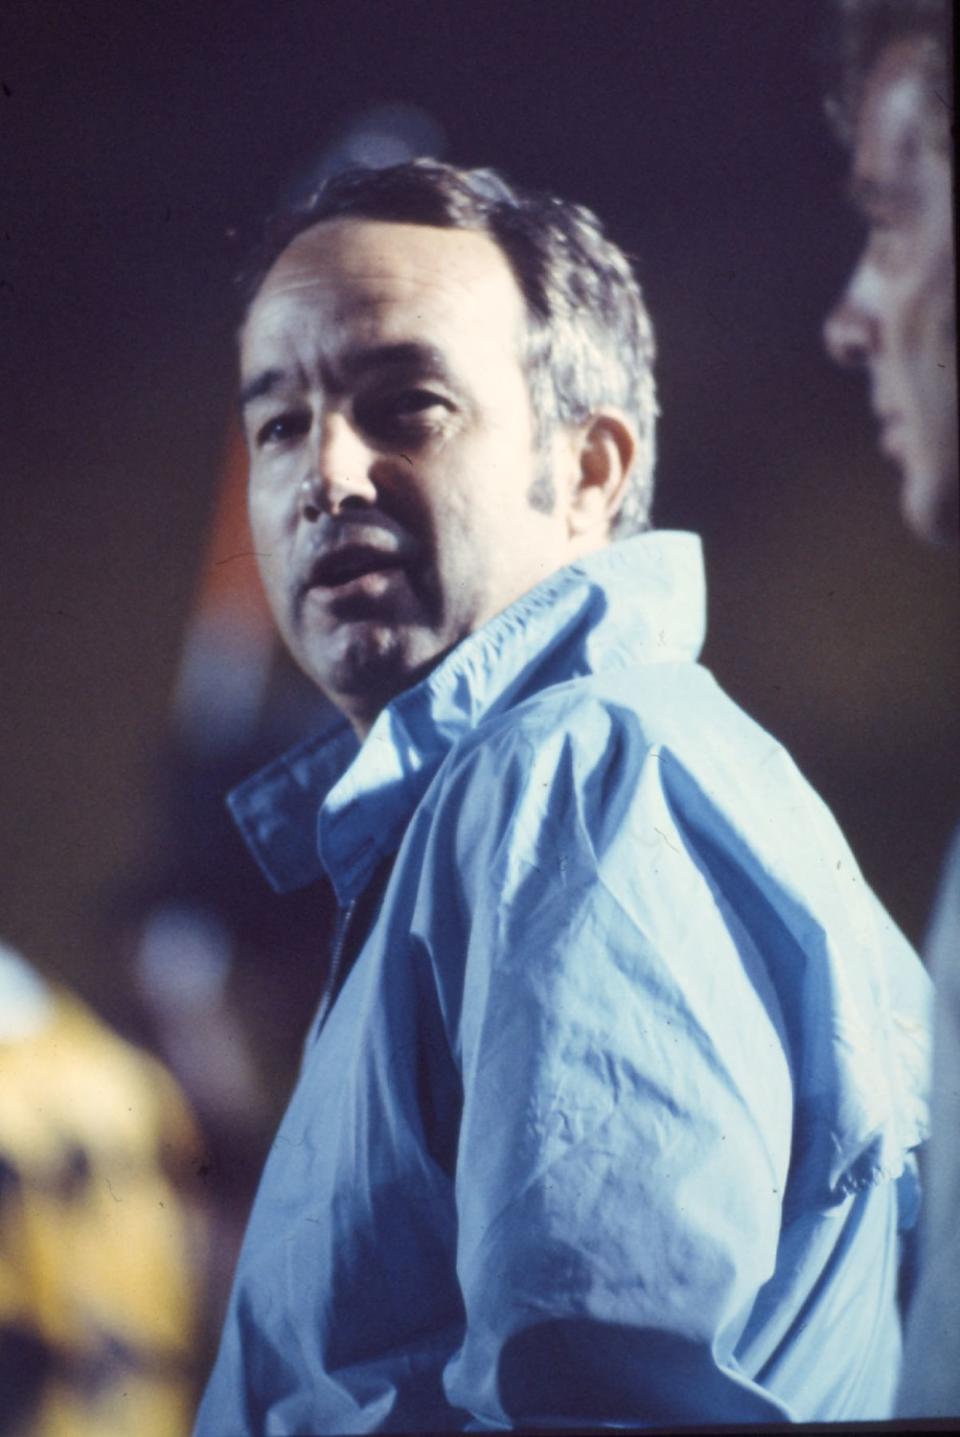 Pepper Rodgers coached UCLA's football team from 1971-73.